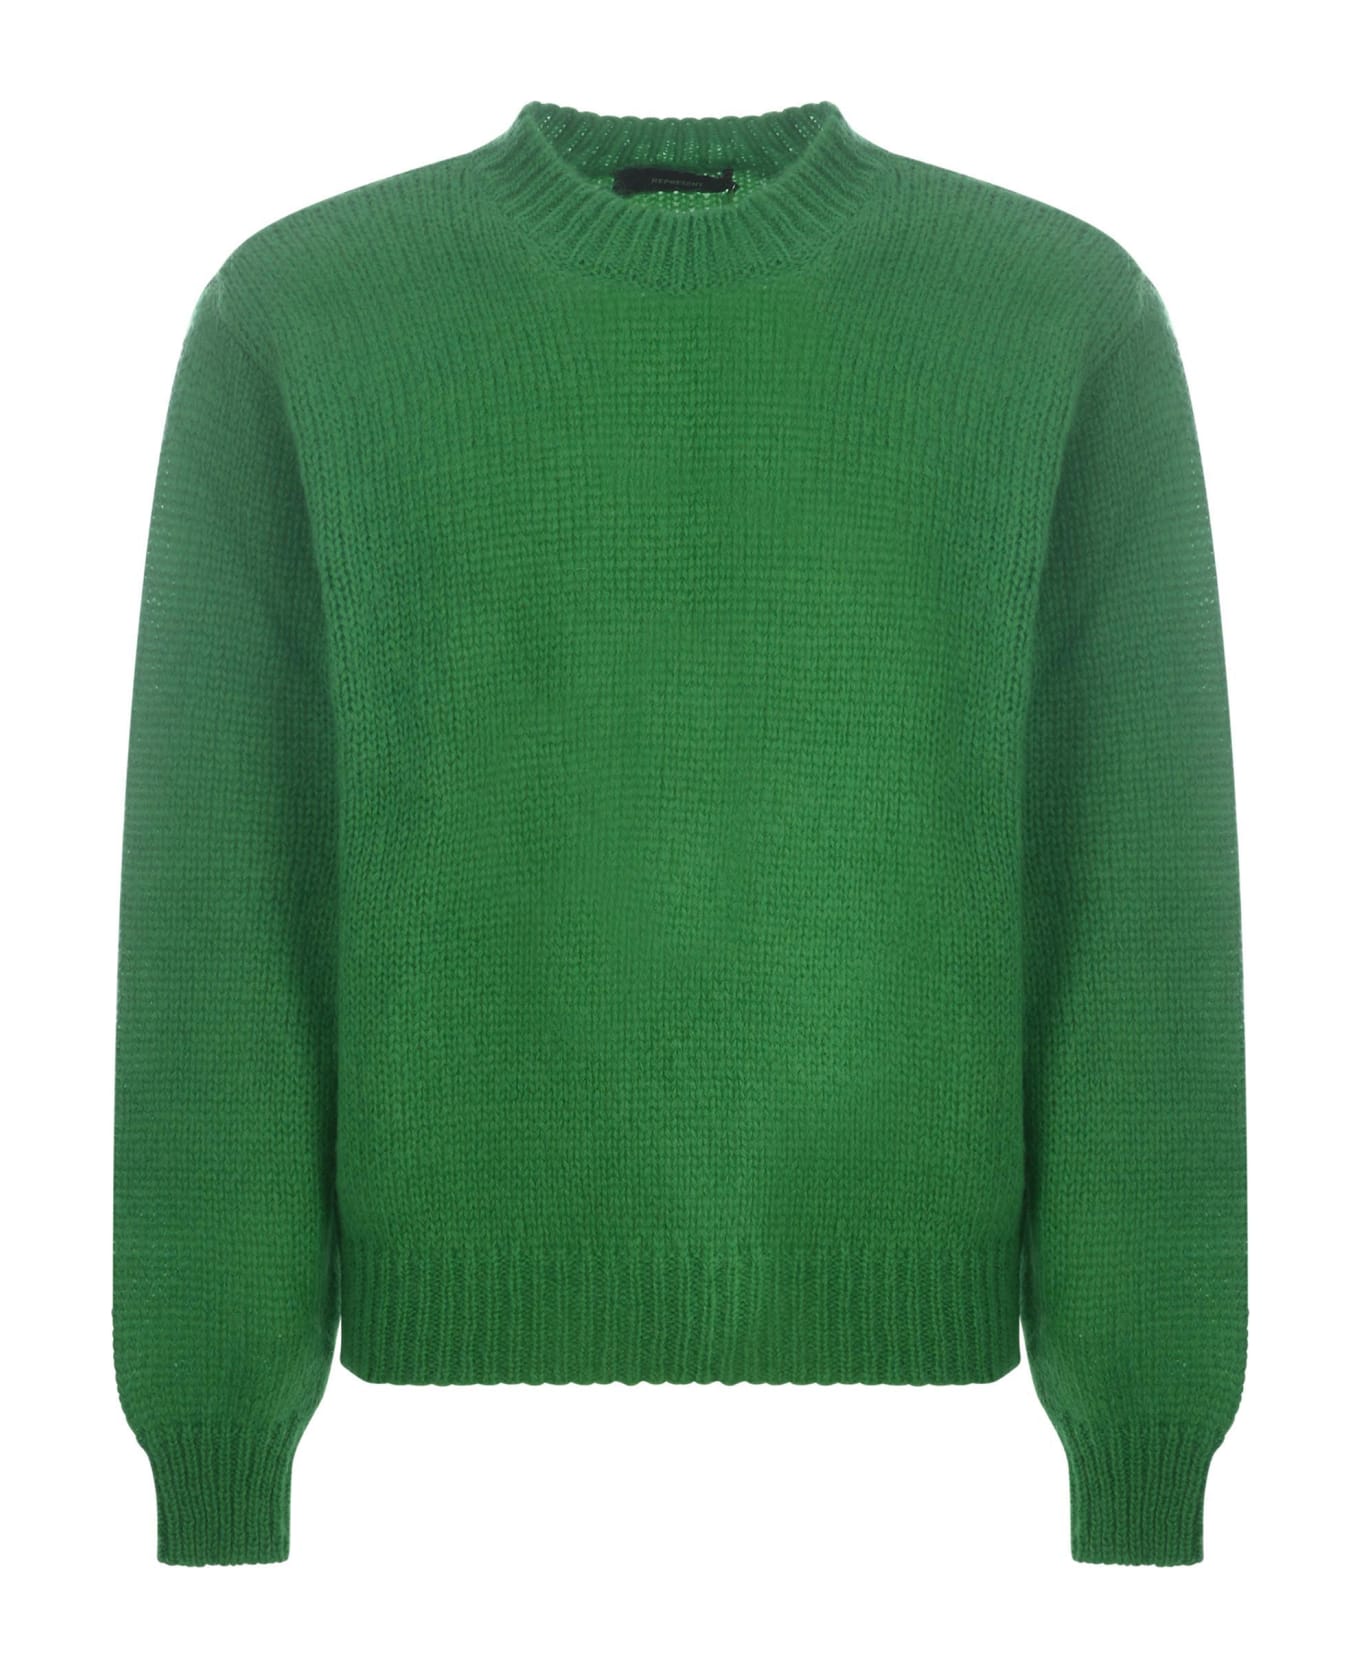 REPRESENT Sweater Represent In Mohair And Wool Blend - Verde ニットウェア